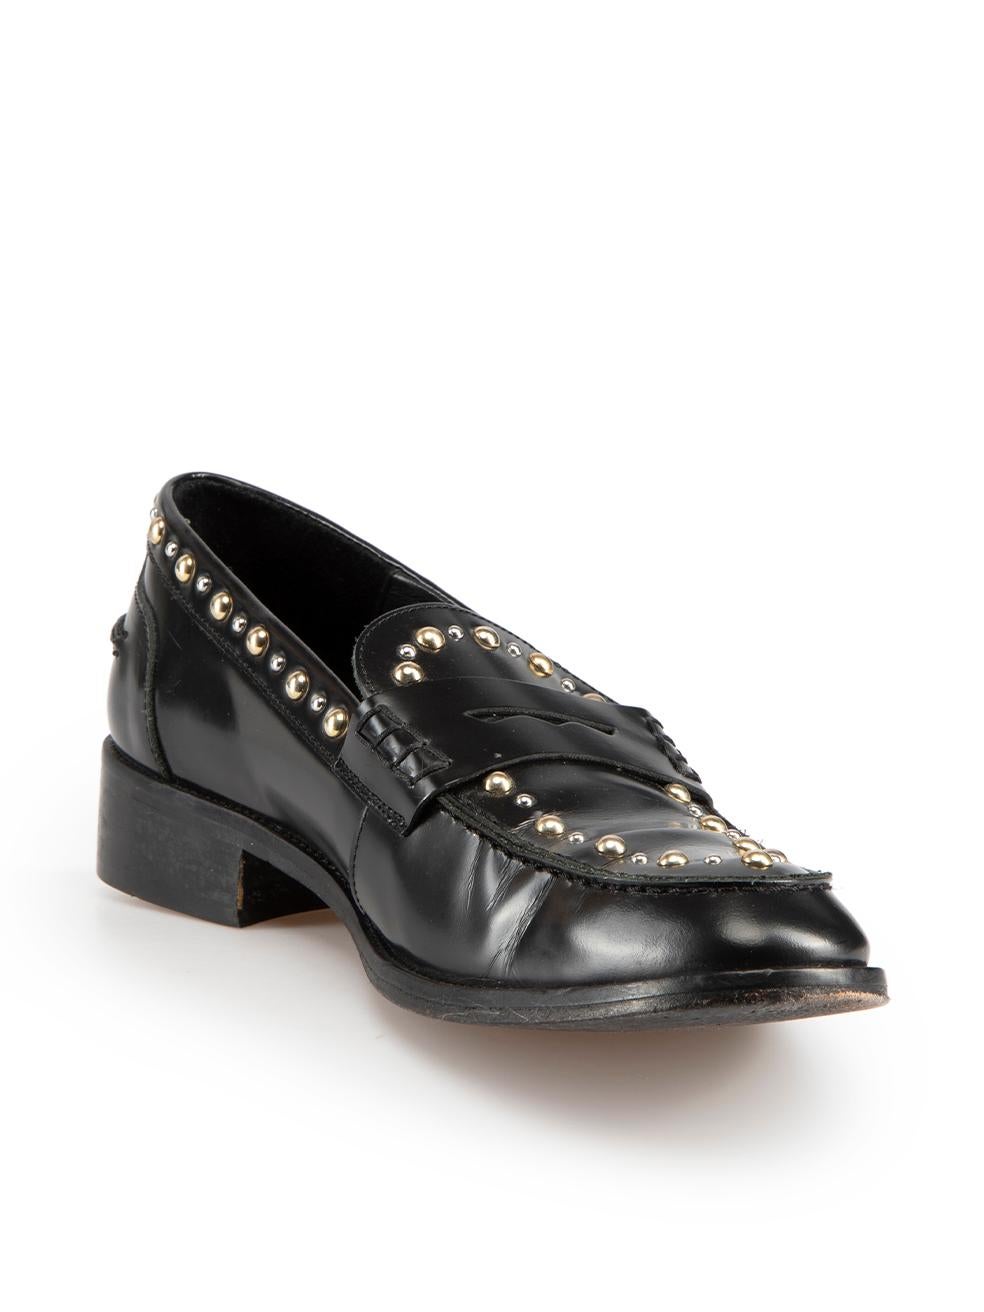 CONDITION is Good. Minor wear to loafers is evident. Light creasing to leather on toe crease and scratches to leather on back of heels on this used Maje designer resale item.
 
Details
Black
Leather
Penny loafers
Almond toe
Slip on
Silver studded